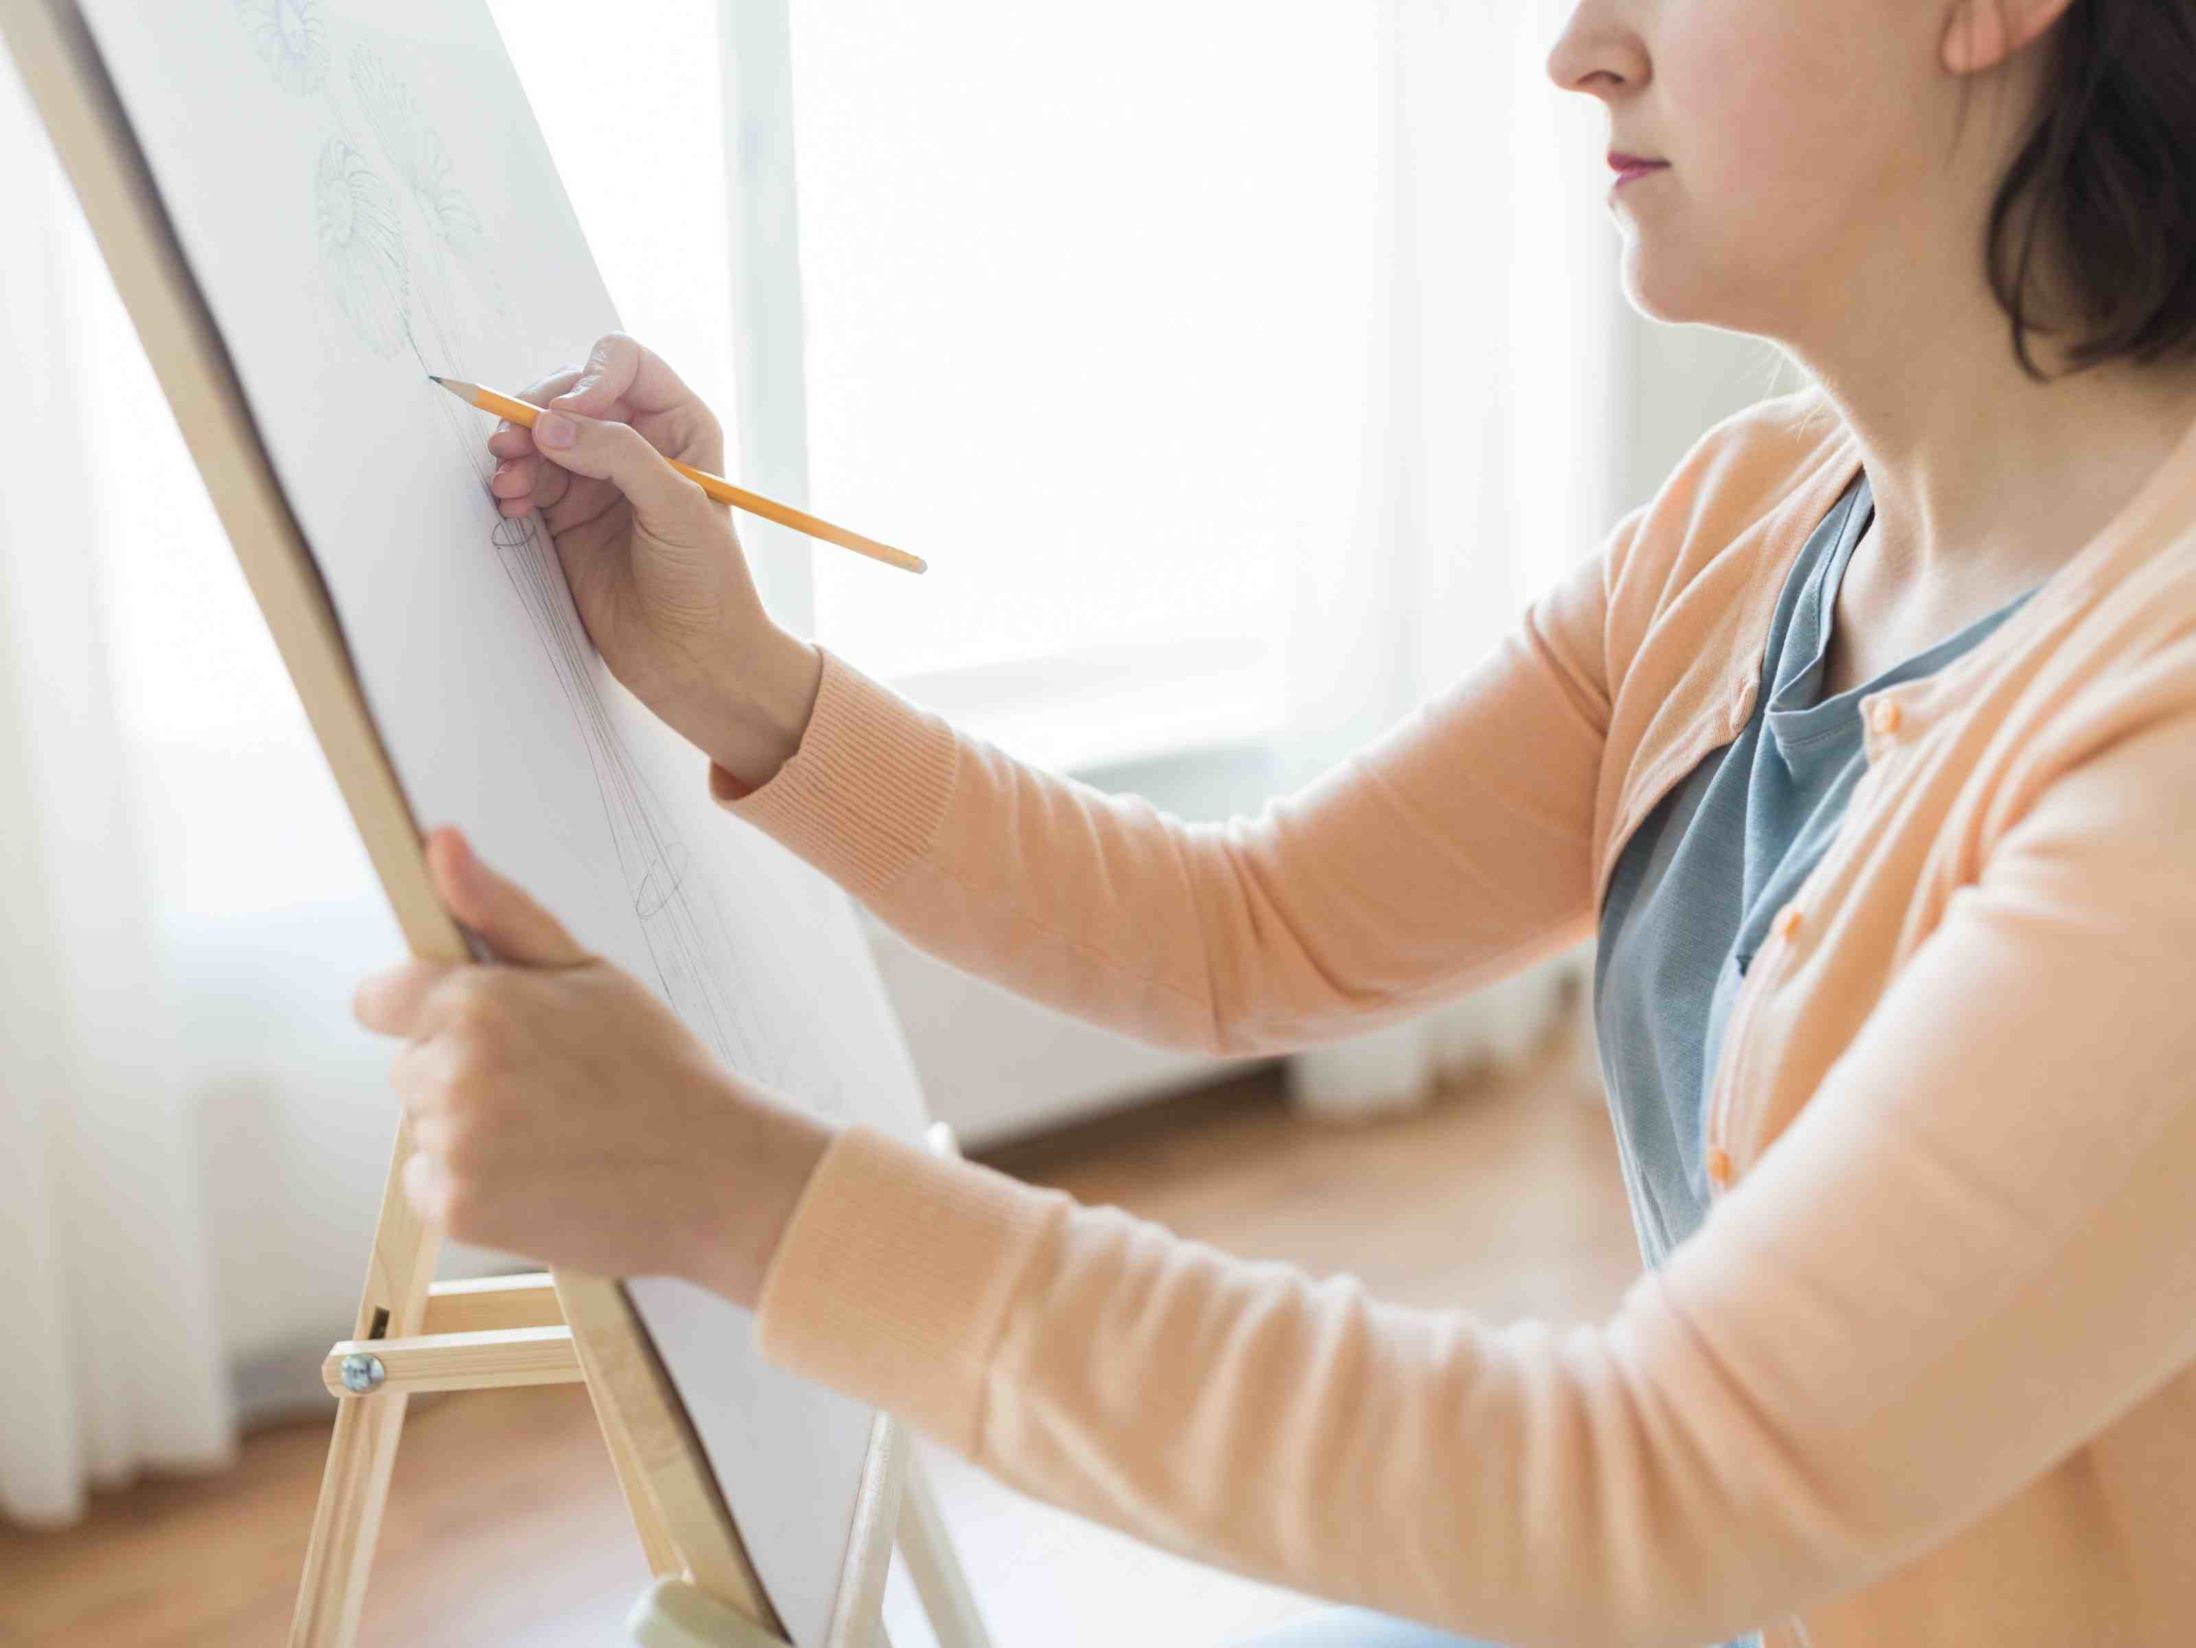 The Best Online Art Classes - ArtyFactory Step-by-Step Guides